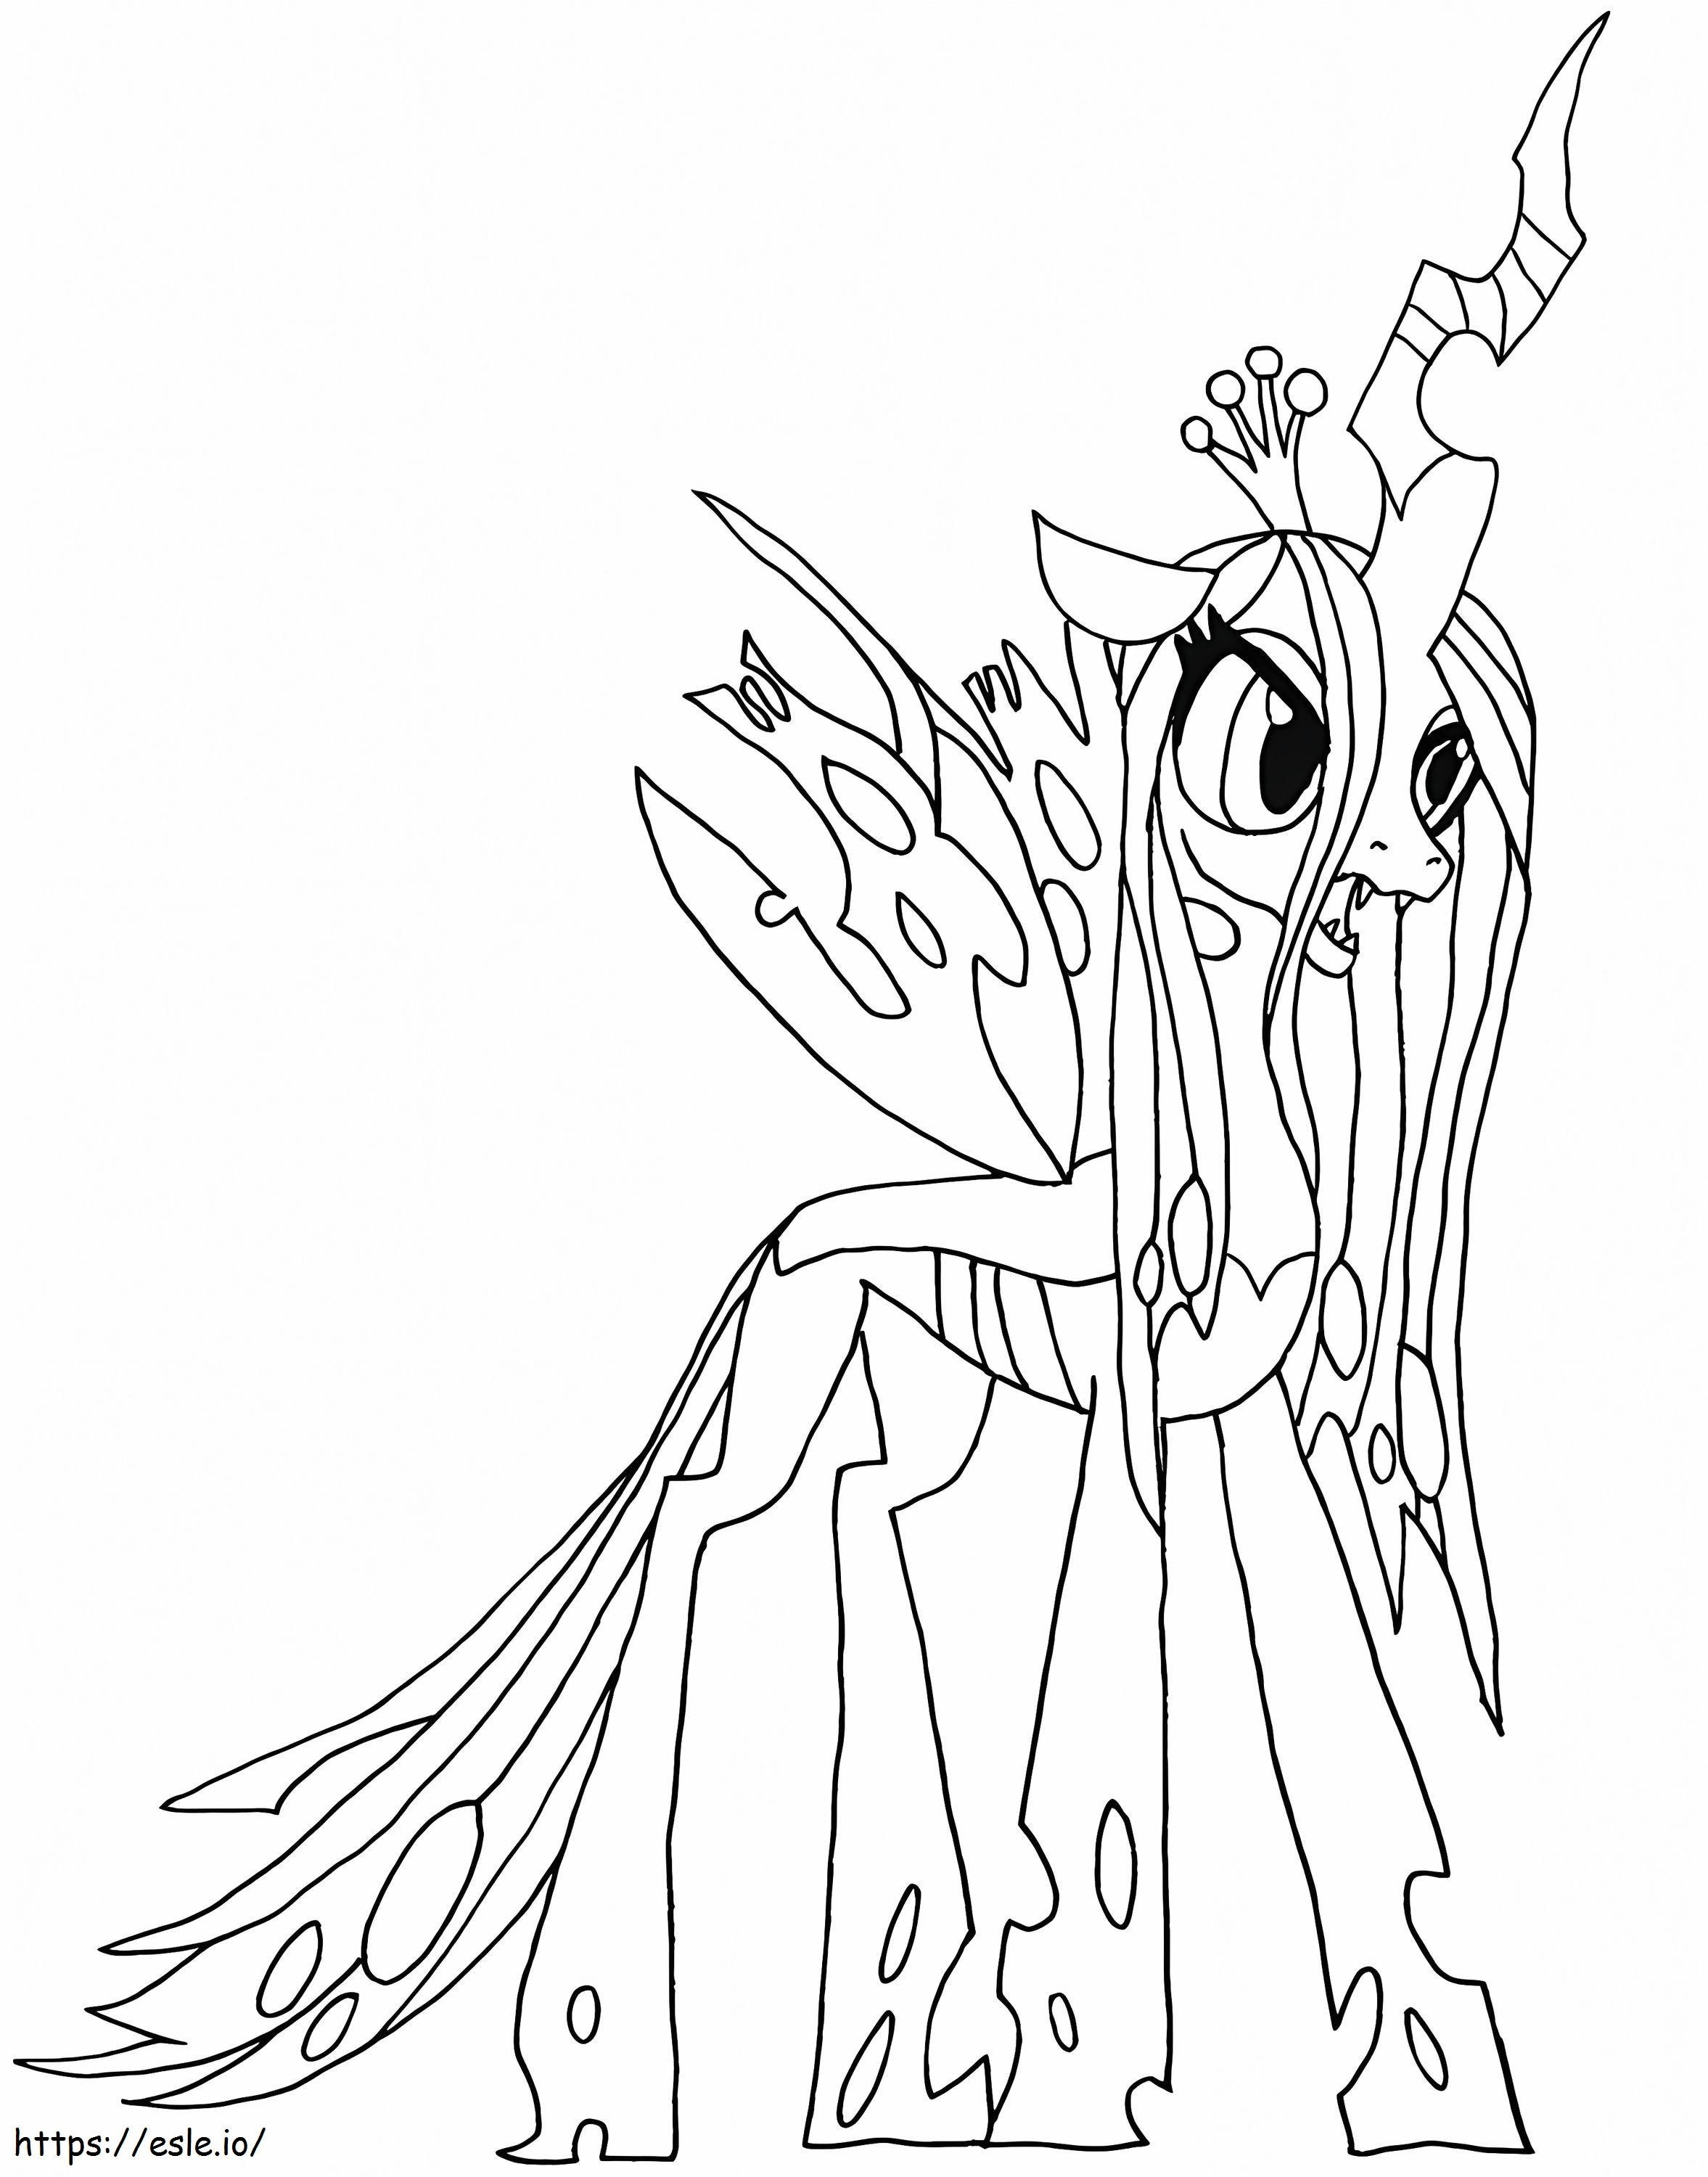 My Little Pony Queen Chrysalis coloring page